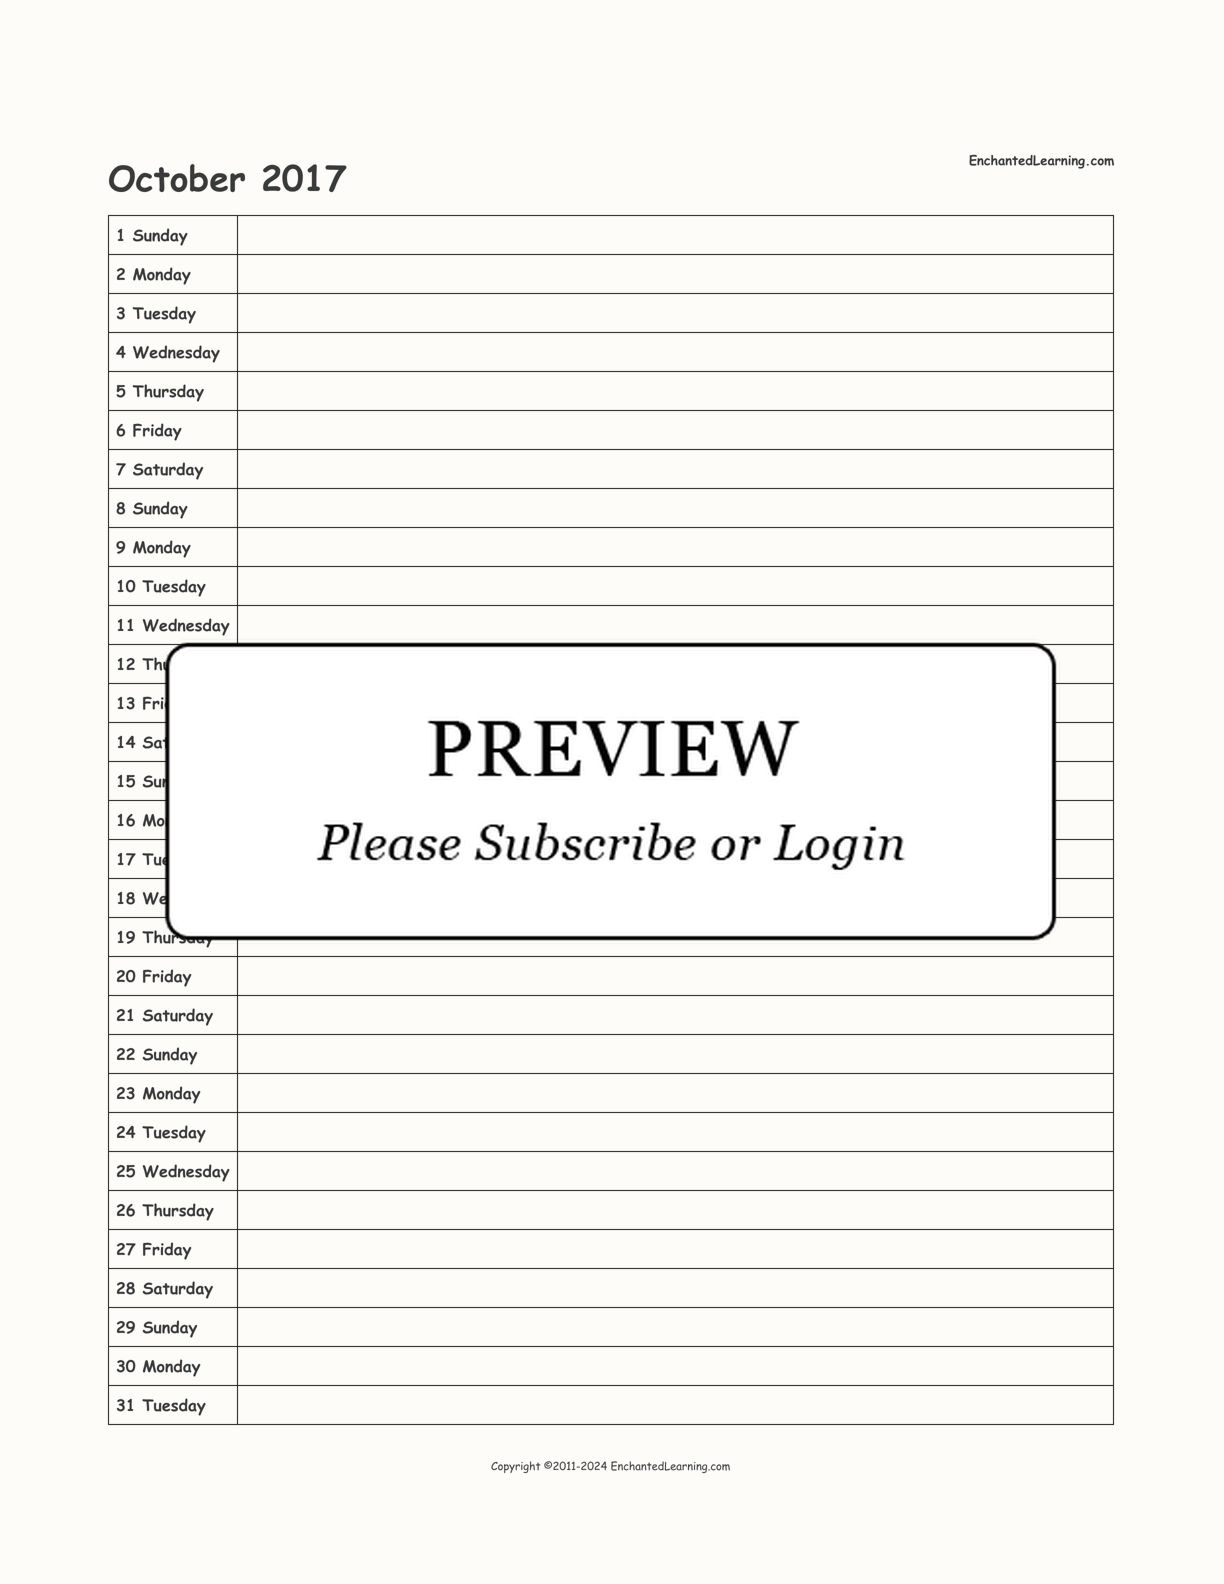 2017 Scheduling Calendar interactive printout page 10